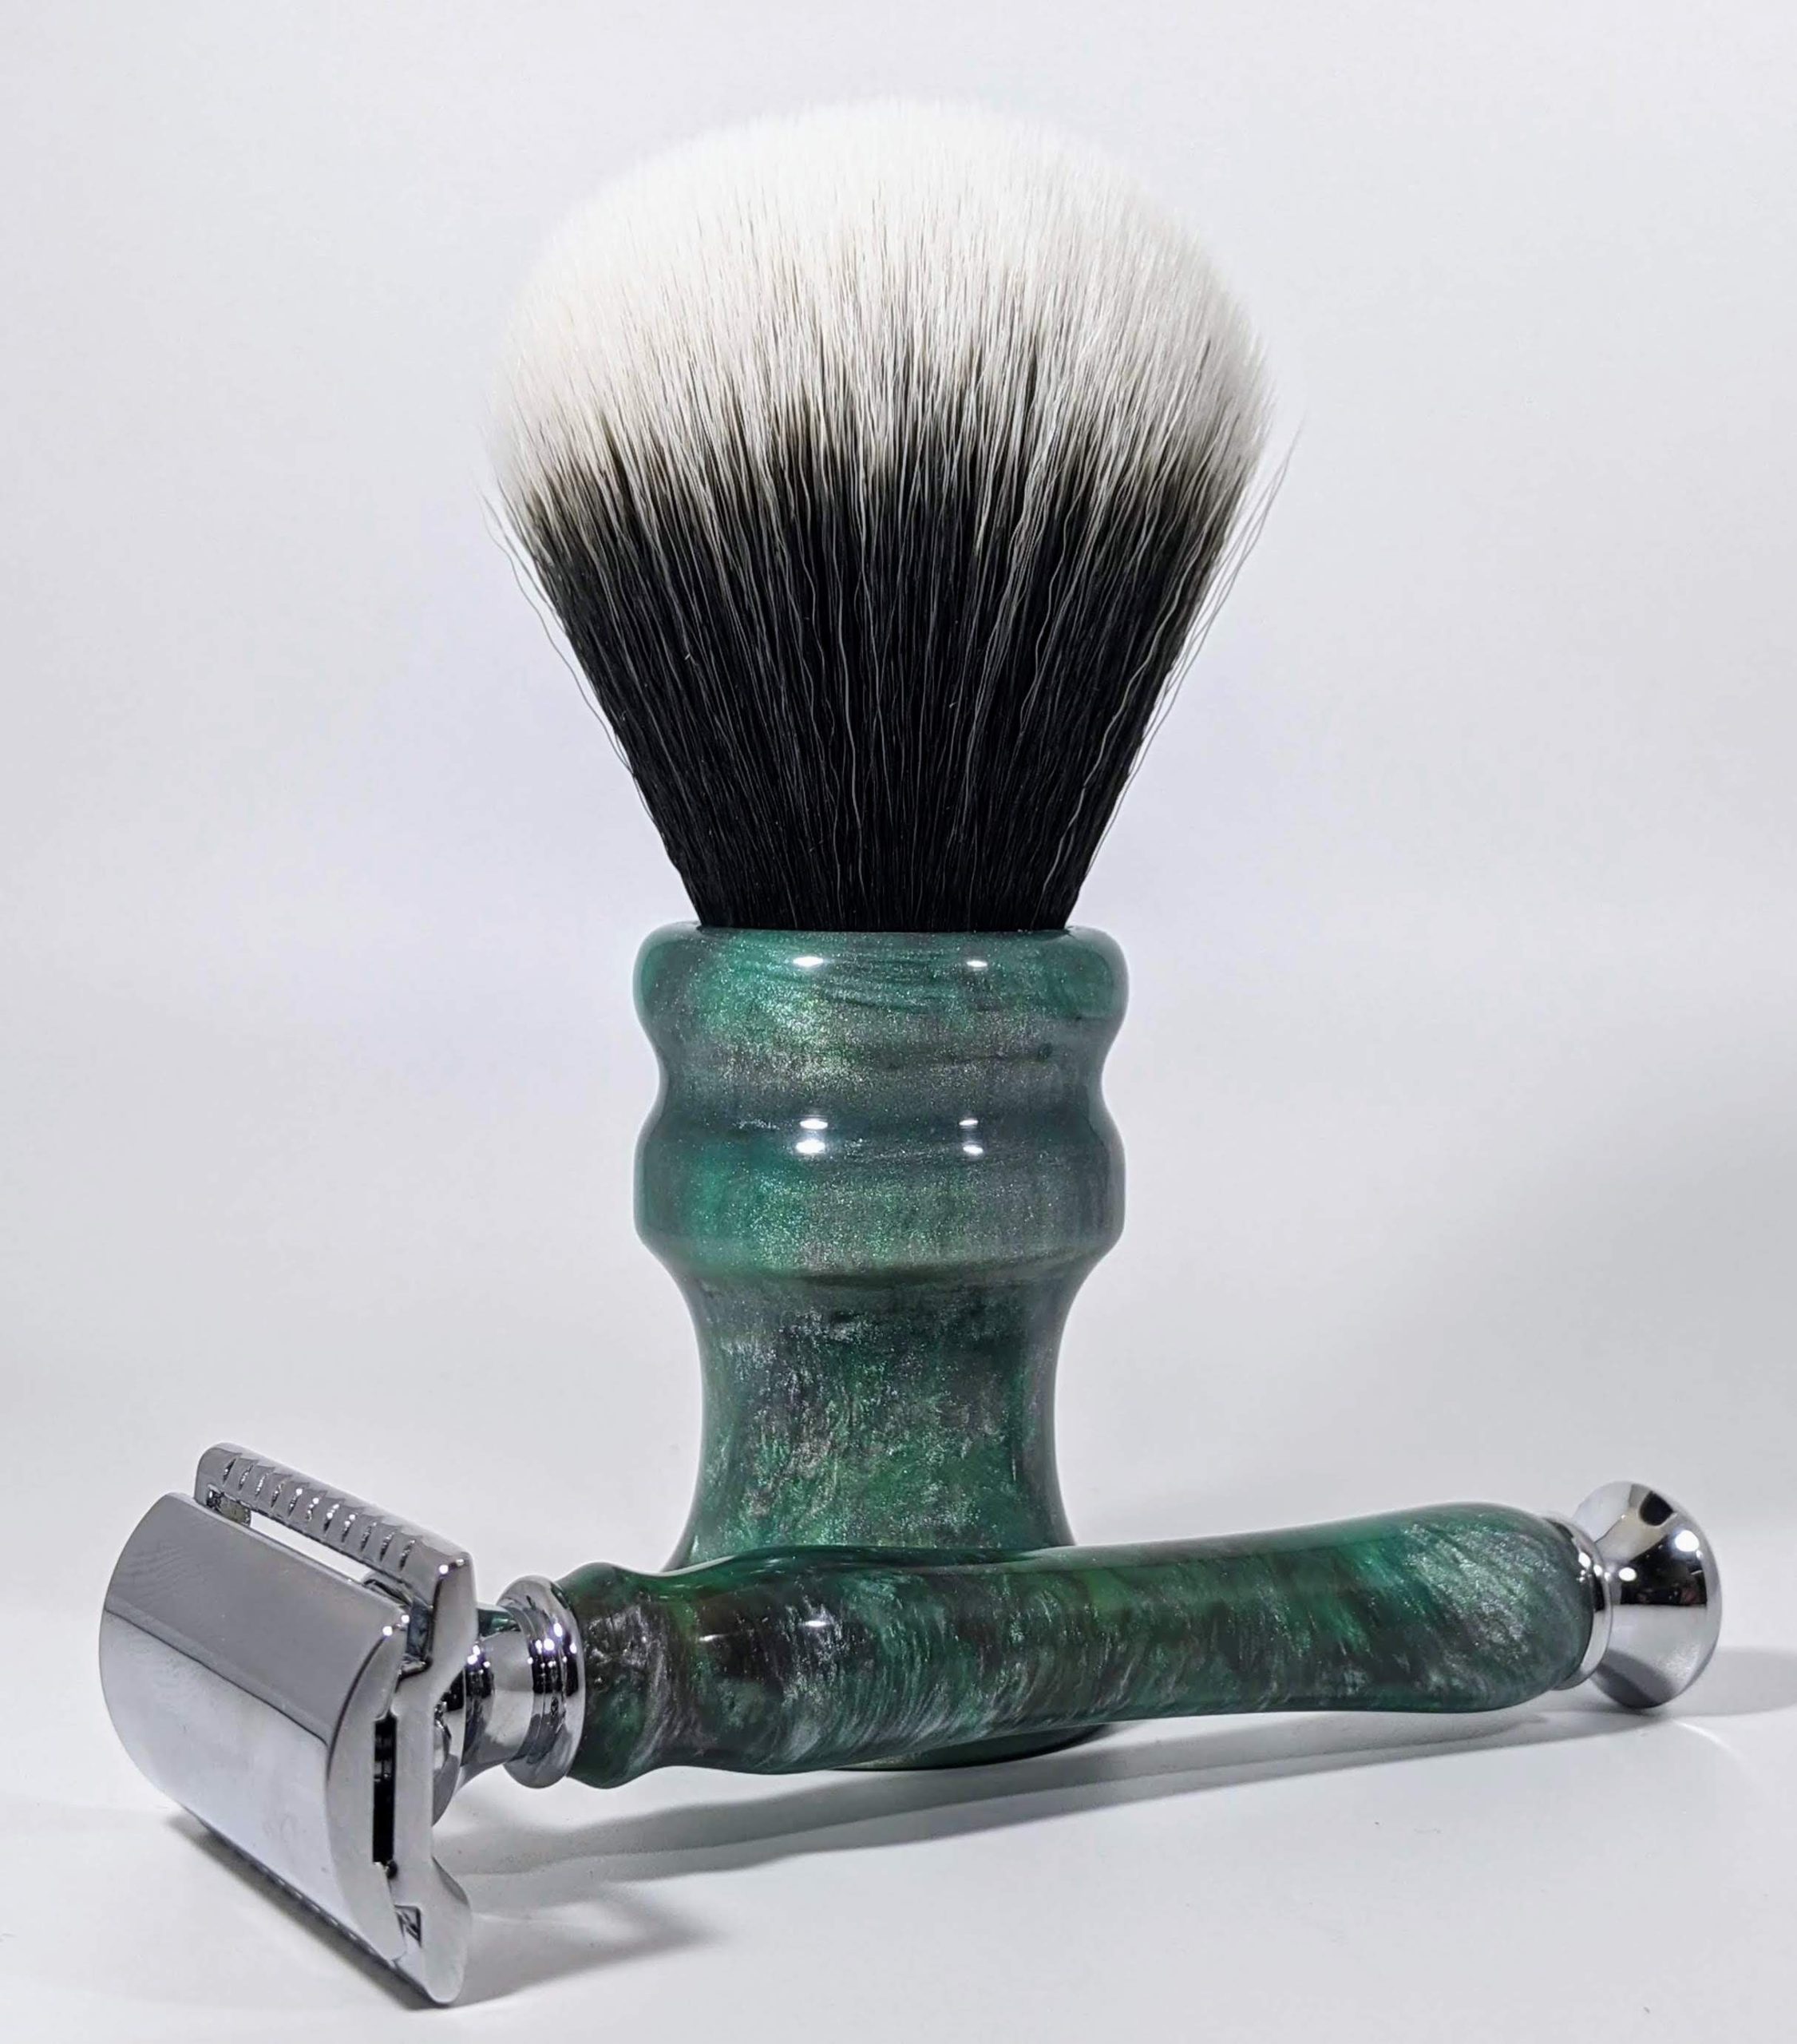 Double edge safety razor and brush set with custom poured jade green and antique silver epoxy handles.